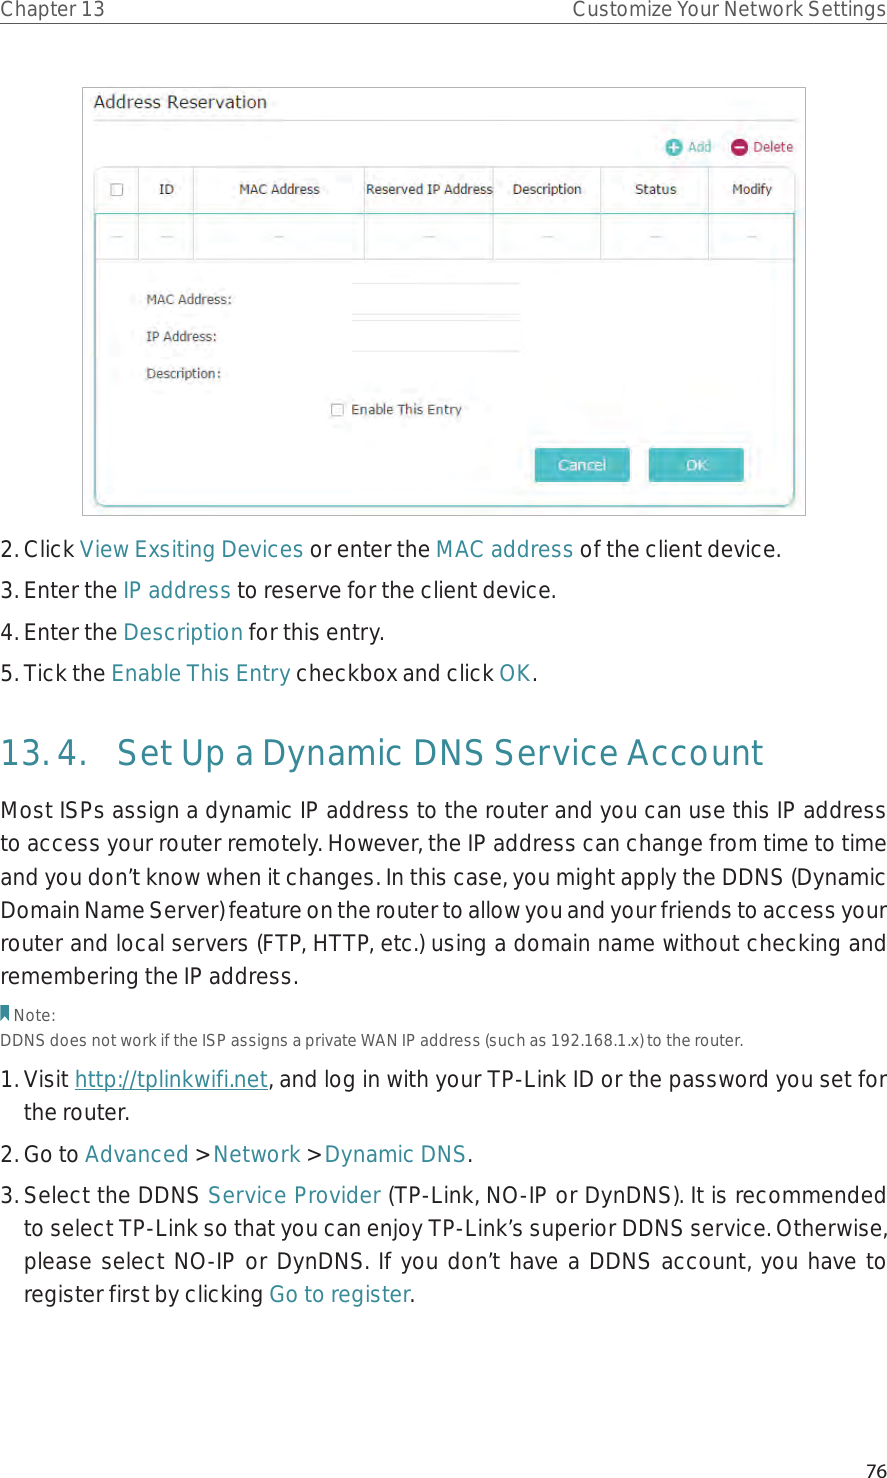 76Chapter 13 Customize Your Network Settings2. Click View Exsiting Devices or enter the MAC address of the client device.3. Enter the IP address to reserve for the client device.4. Enter the Description for this entry.5. Tick the Enable This Entry checkbox and click OK. 13. 4.  Set Up a Dynamic DNS Service AccountMost ISPs assign a dynamic IP address to the router and you can use this IP address to access your router remotely. However, the IP address can change from time to time and you don’t know when it changes. In this case, you might apply the DDNS (Dynamic Domain Name Server) feature on the router to allow you and your friends to access your router and local servers (FTP, HTTP, etc.) using a domain name without checking and remembering the IP address. Note: DDNS does not work if the ISP assigns a private WAN IP address (such as 192.168.1.x) to the router. 1. Visit http://tplinkwifi.net, and log in with your TP-Link ID or the password you set for the router.2. Go to Advanced &gt; Network &gt; Dynamic DNS.3. Select the DDNS Service Provider (TP-Link, NO-IP or DynDNS). It is recommended to select TP-Link so that you can enjoy TP-Link’s superior DDNS service. Otherwise, please select NO-IP or DynDNS. If you don’t have a DDNS account, you have to  register first by clicking Go to register.